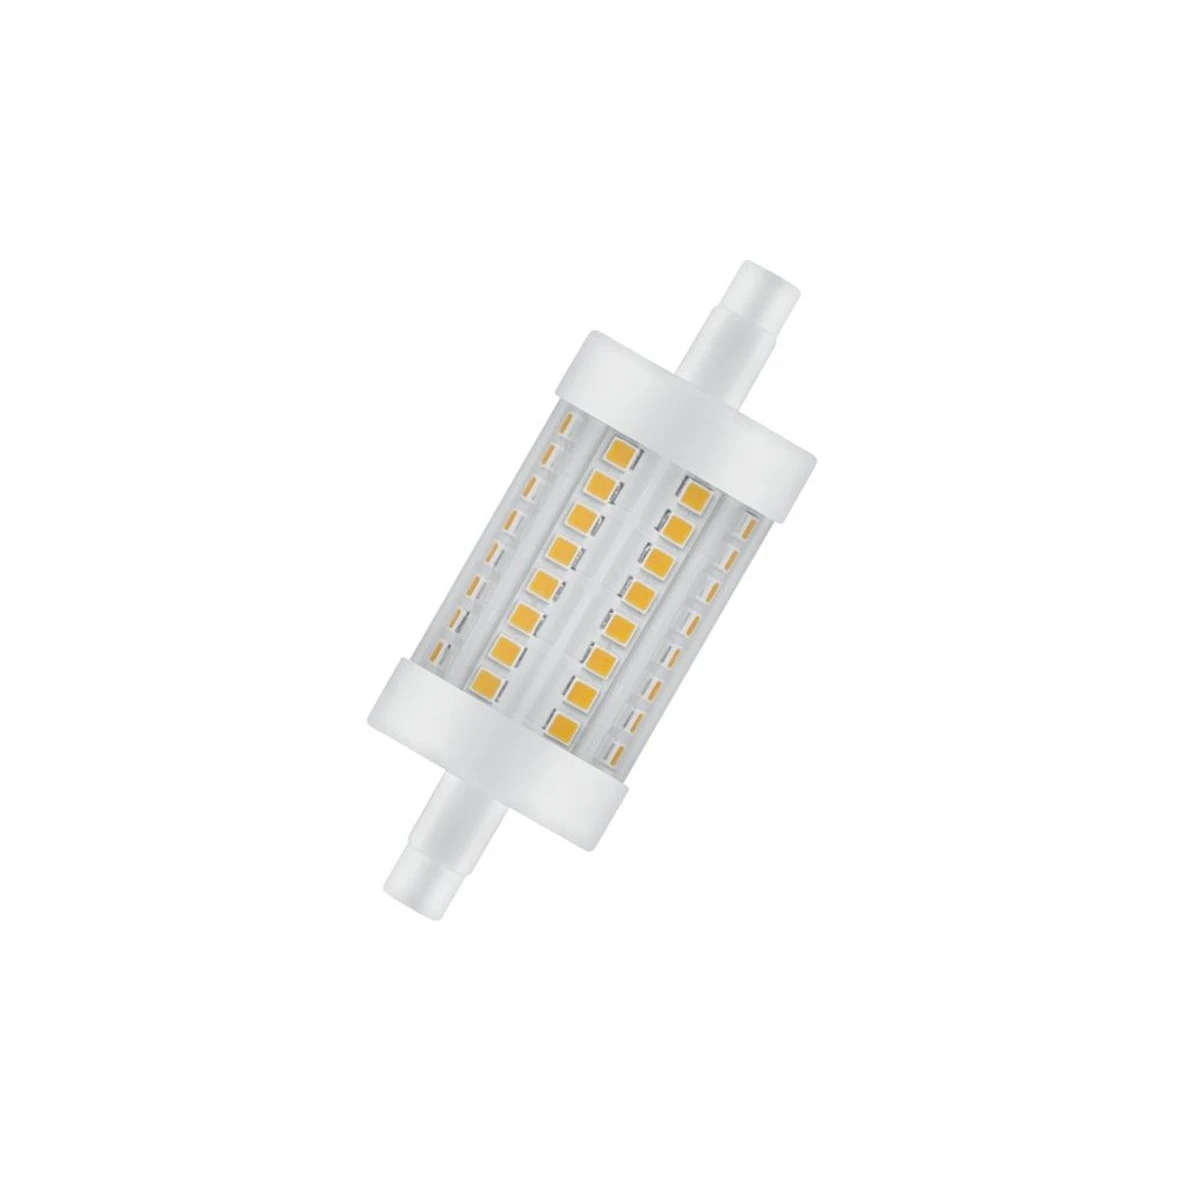 Bulb LED 8W Dimmable 78mm R7s - Osram - Buy online